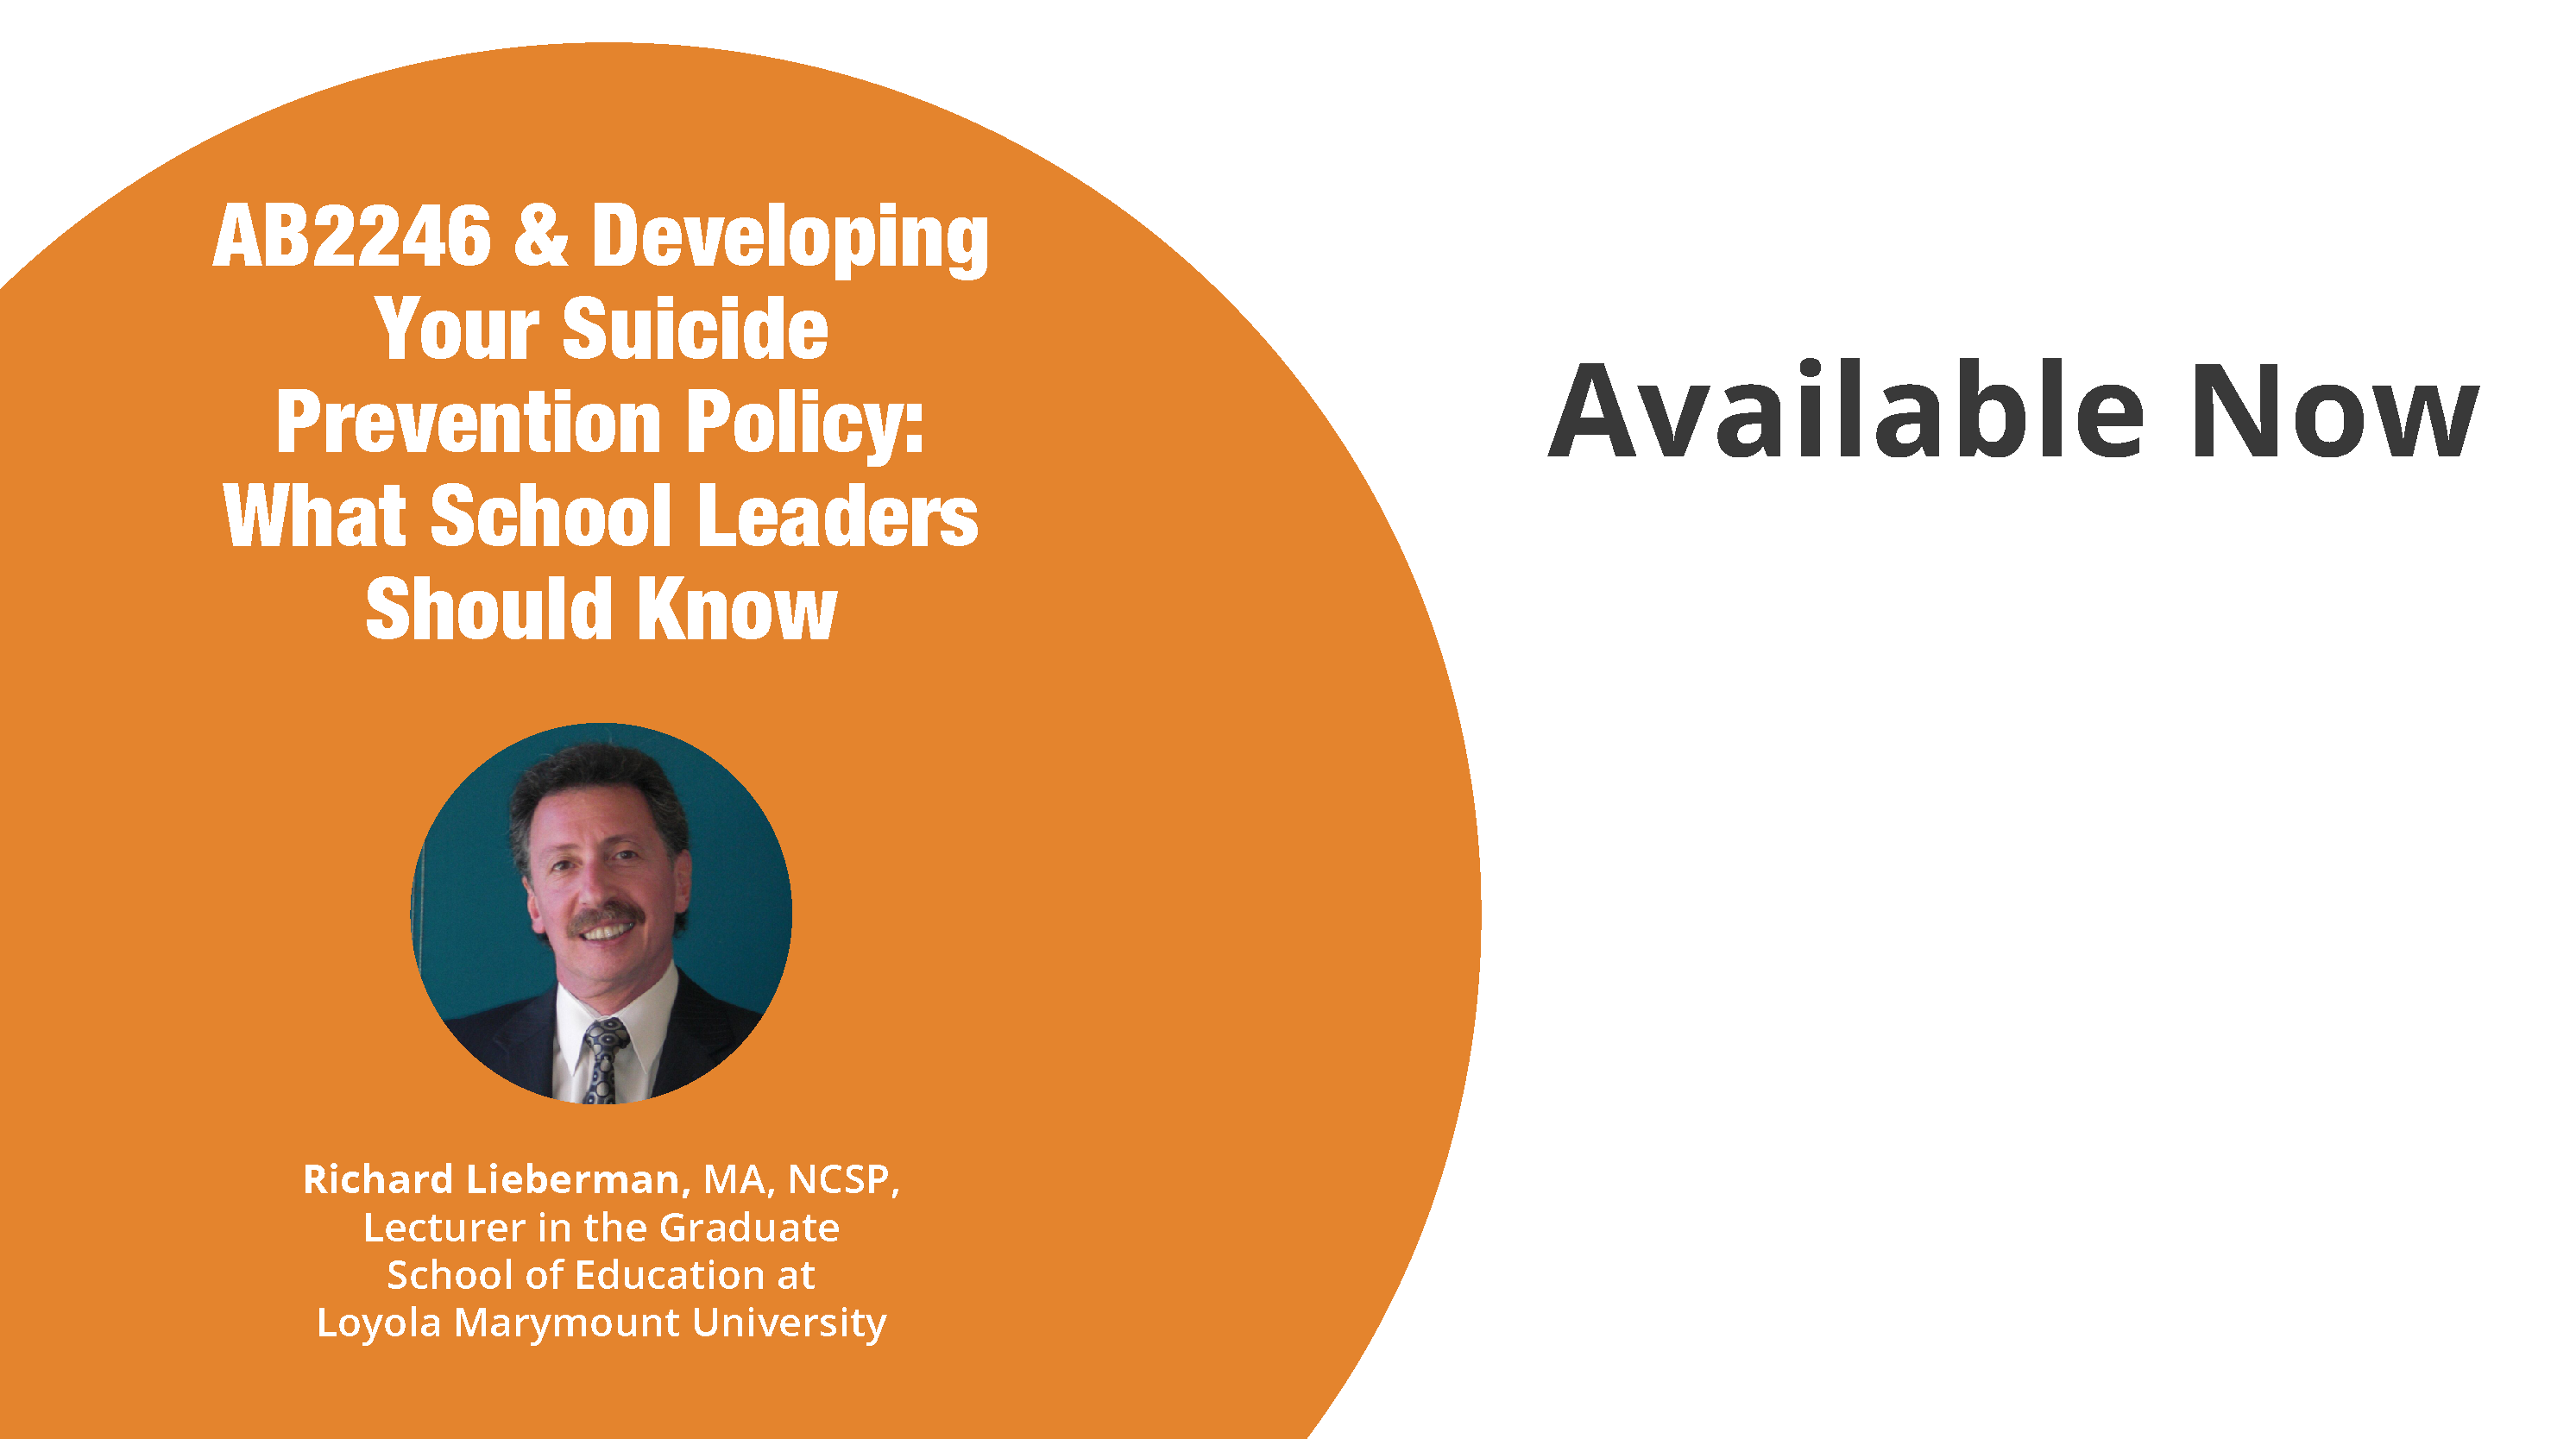 AB2246 & Developing Your Suicide Prevention Policy: What School Leaders Should Know